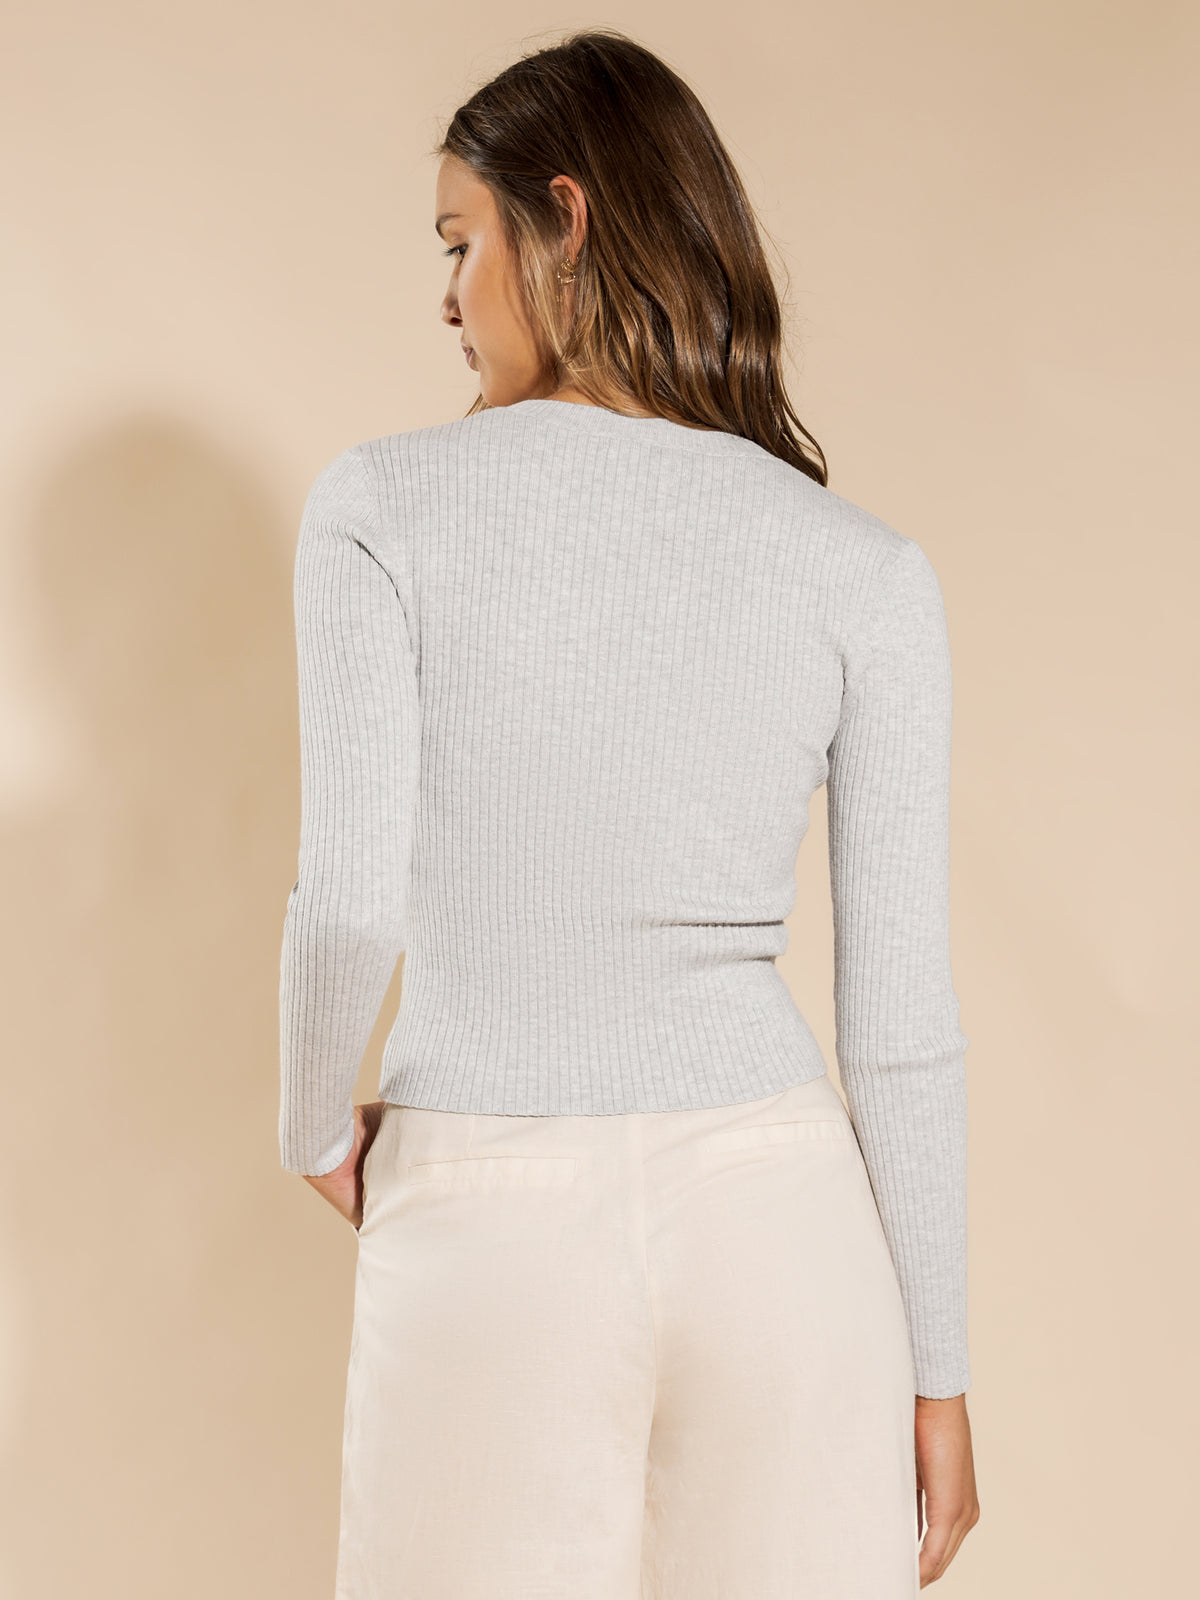 Classic Knit in Grey Marle